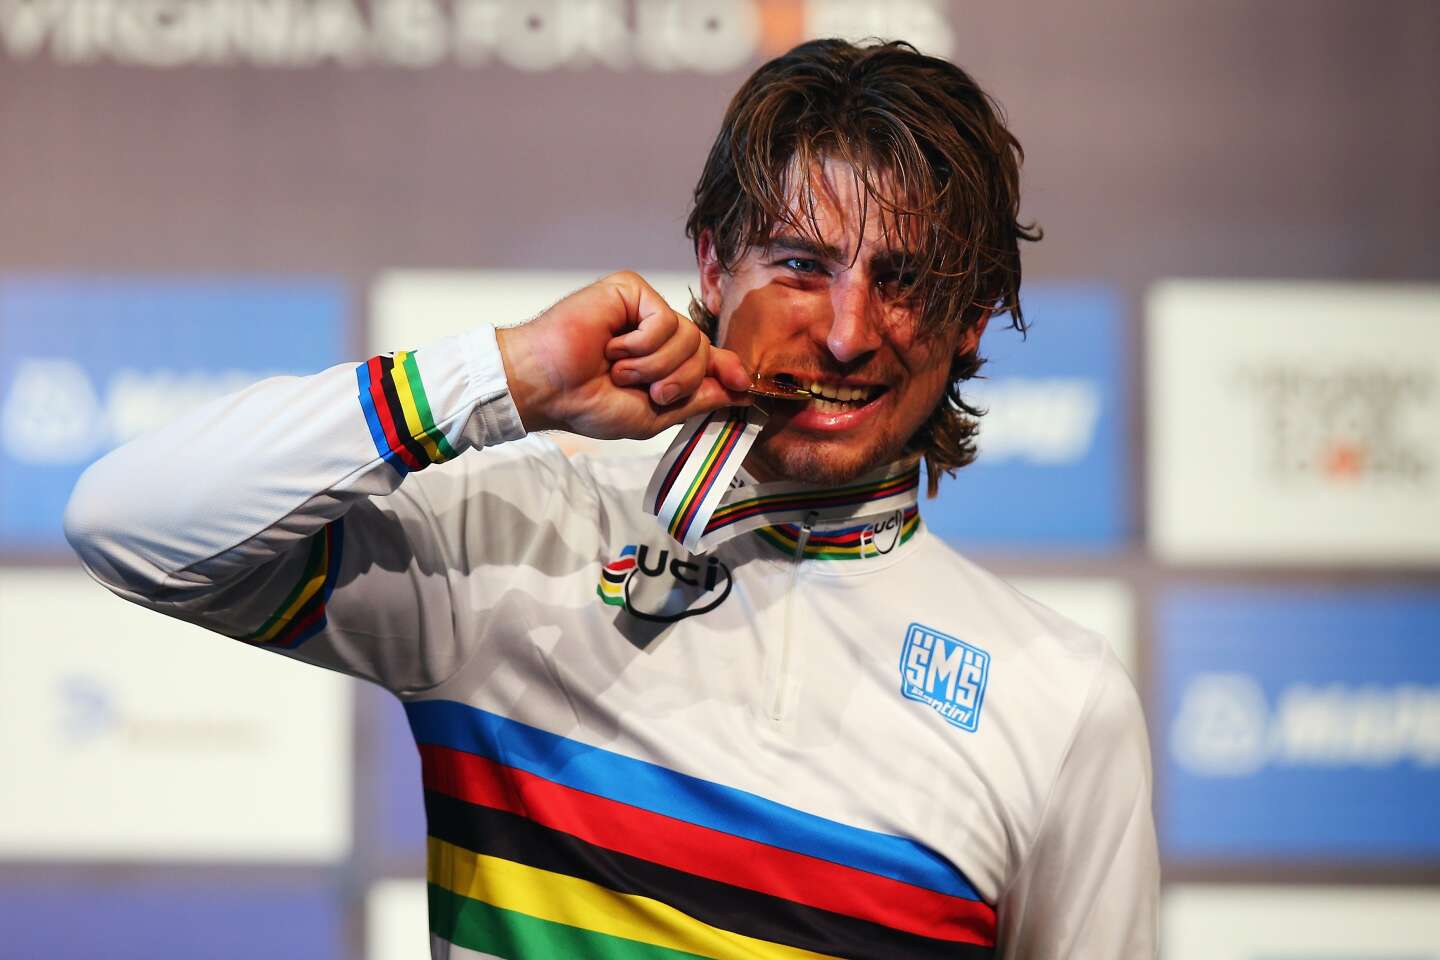 Peter Sagan, the rockstar of cycling, bids farewell to the road and aims for Paris 2024 by mountain bike